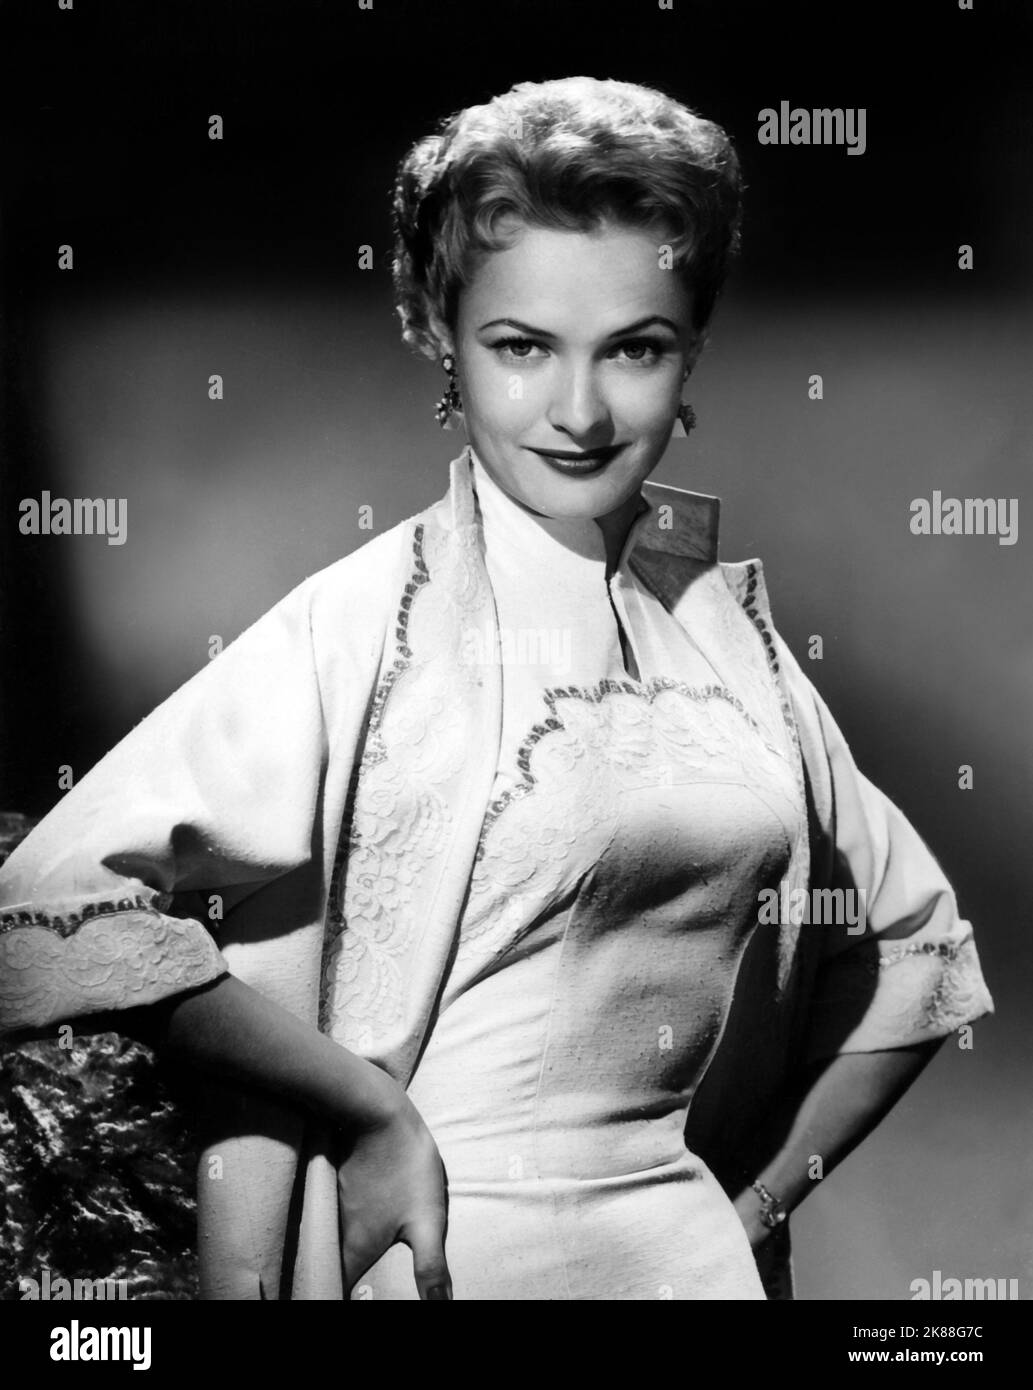 Actress fay spain 1959 hi-res stock photography and images - Alamy